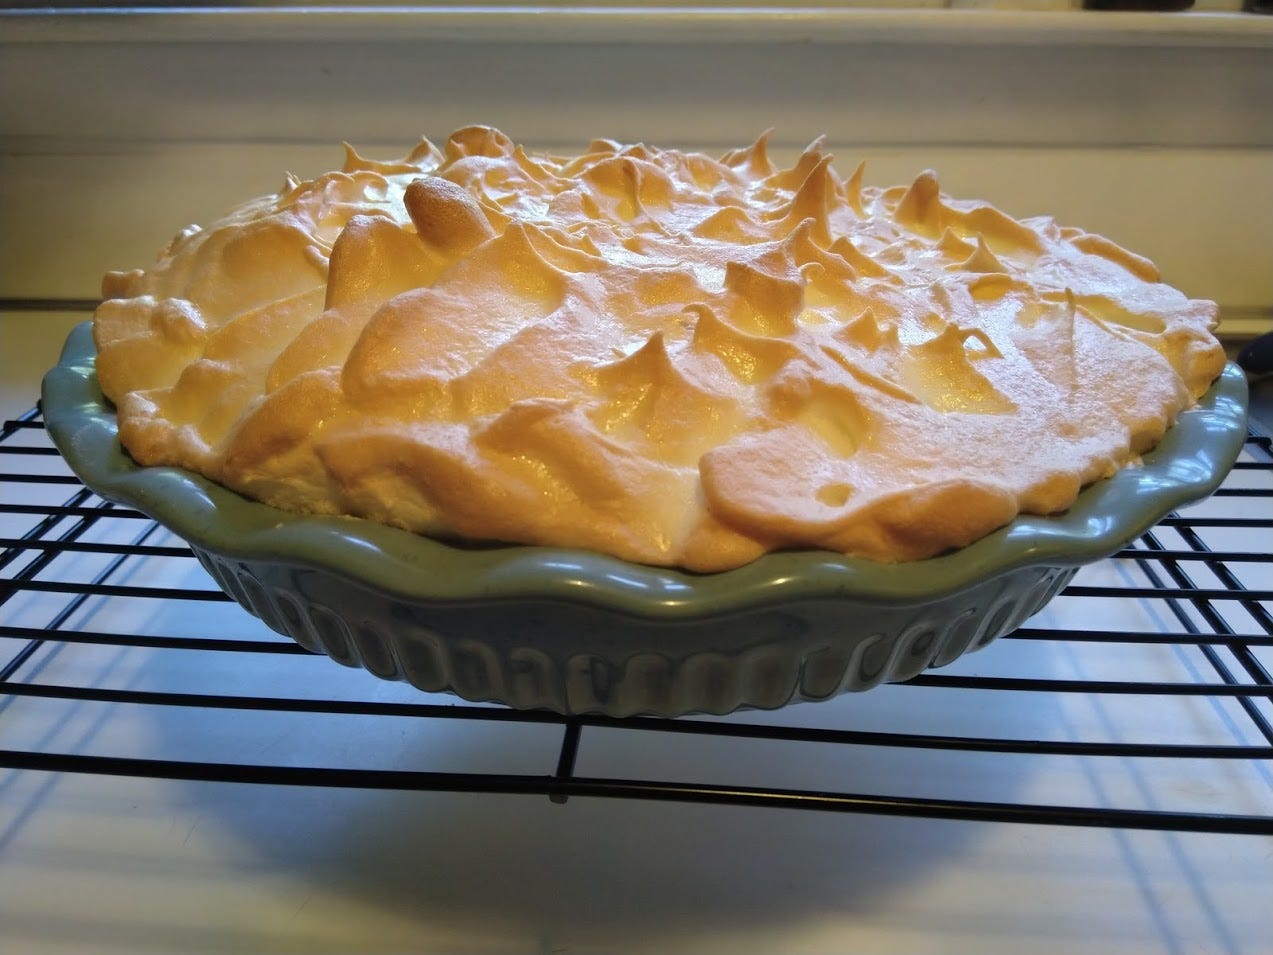 A golden brown merangue pie in a teal ceramic pie dish, cooling on a rack